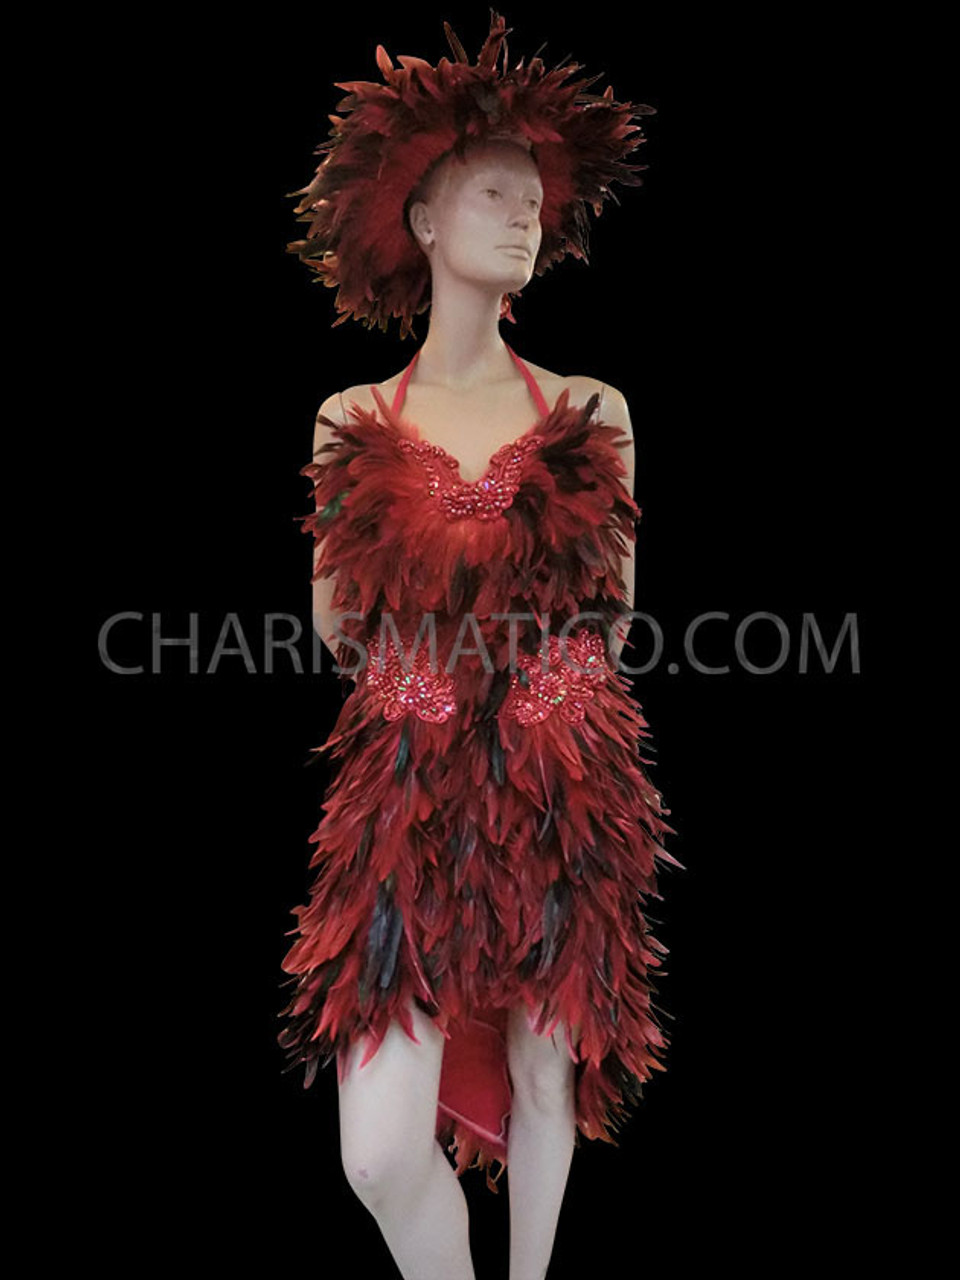 Fluffy Dark Red Feathered Hat And Matching Corset Style Dress